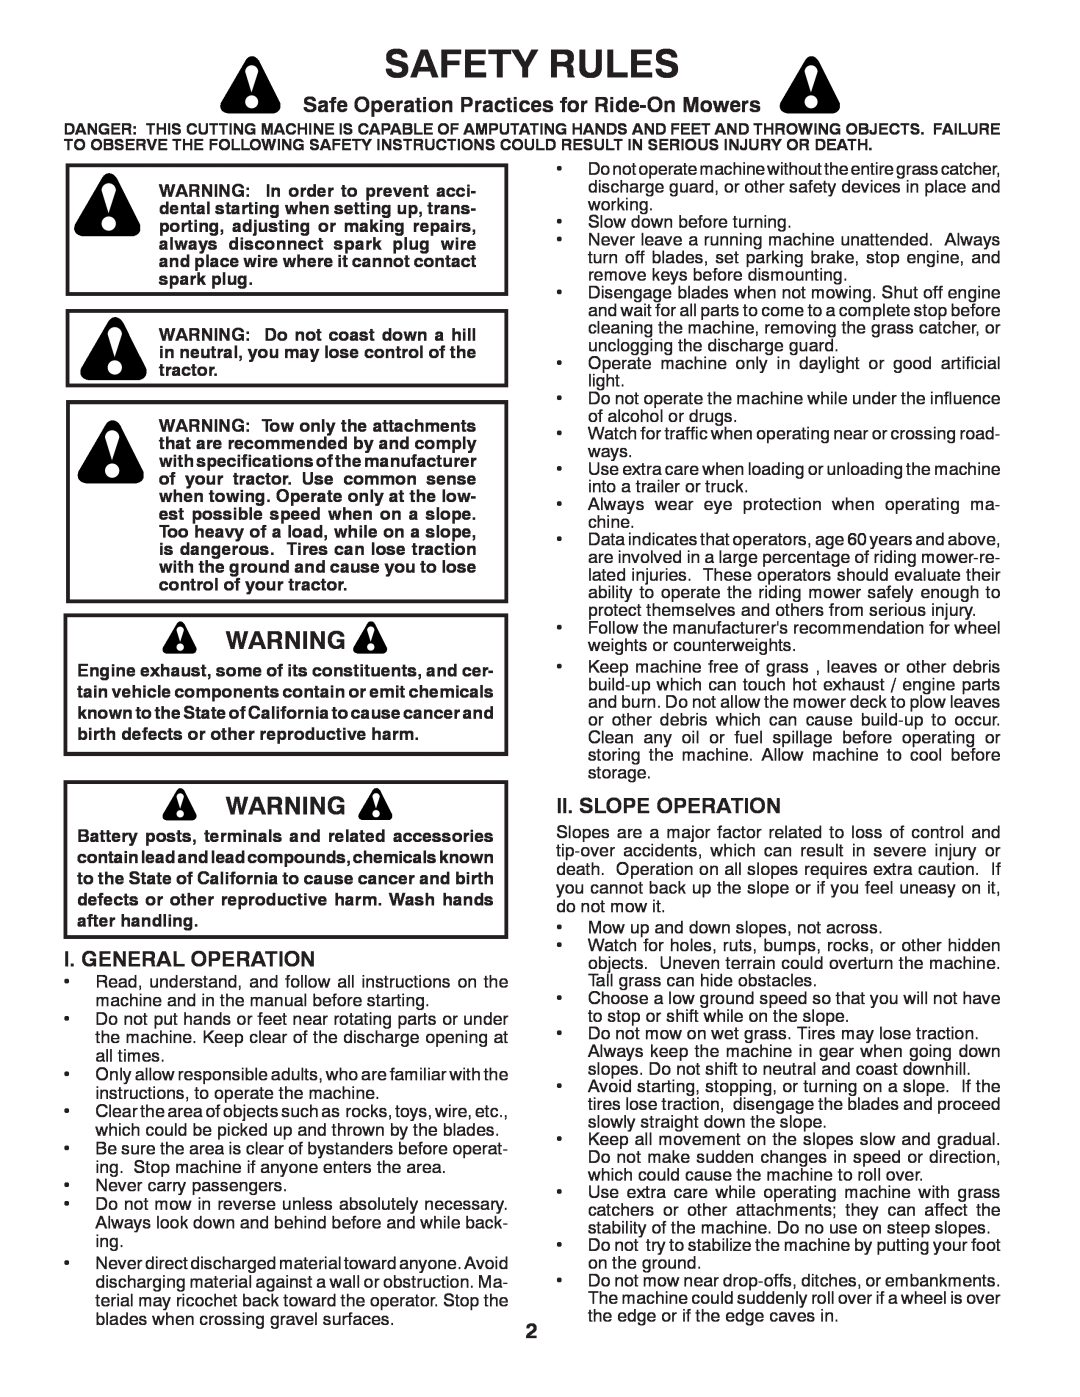 Husqvarna 96043002402 Safety Rules, Safe Operation Practices for Ride-On Mowers, I. General Operation, Ii. Slope Operation 